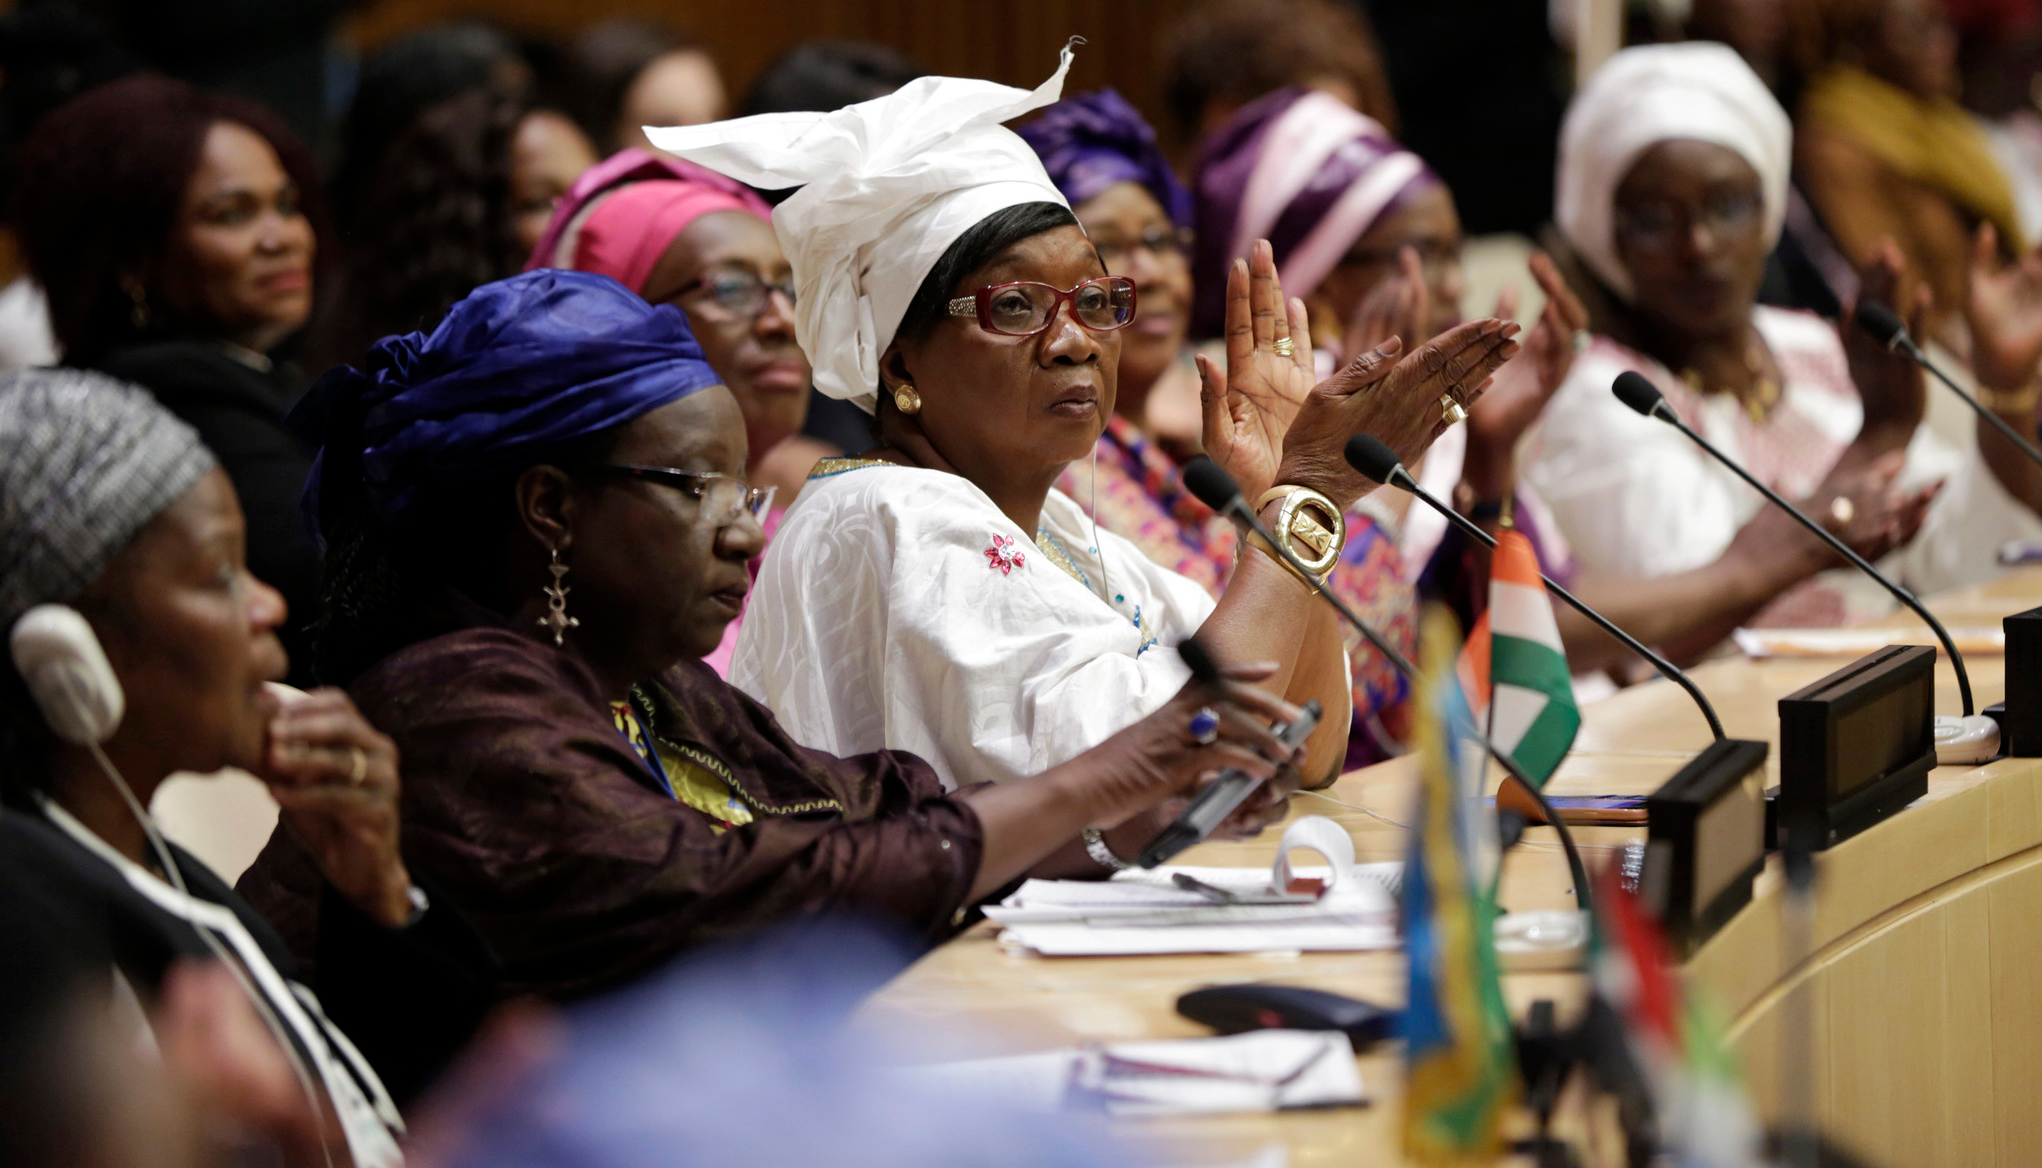 A photo of women participating in a formal peace process echoes the theme of the event.